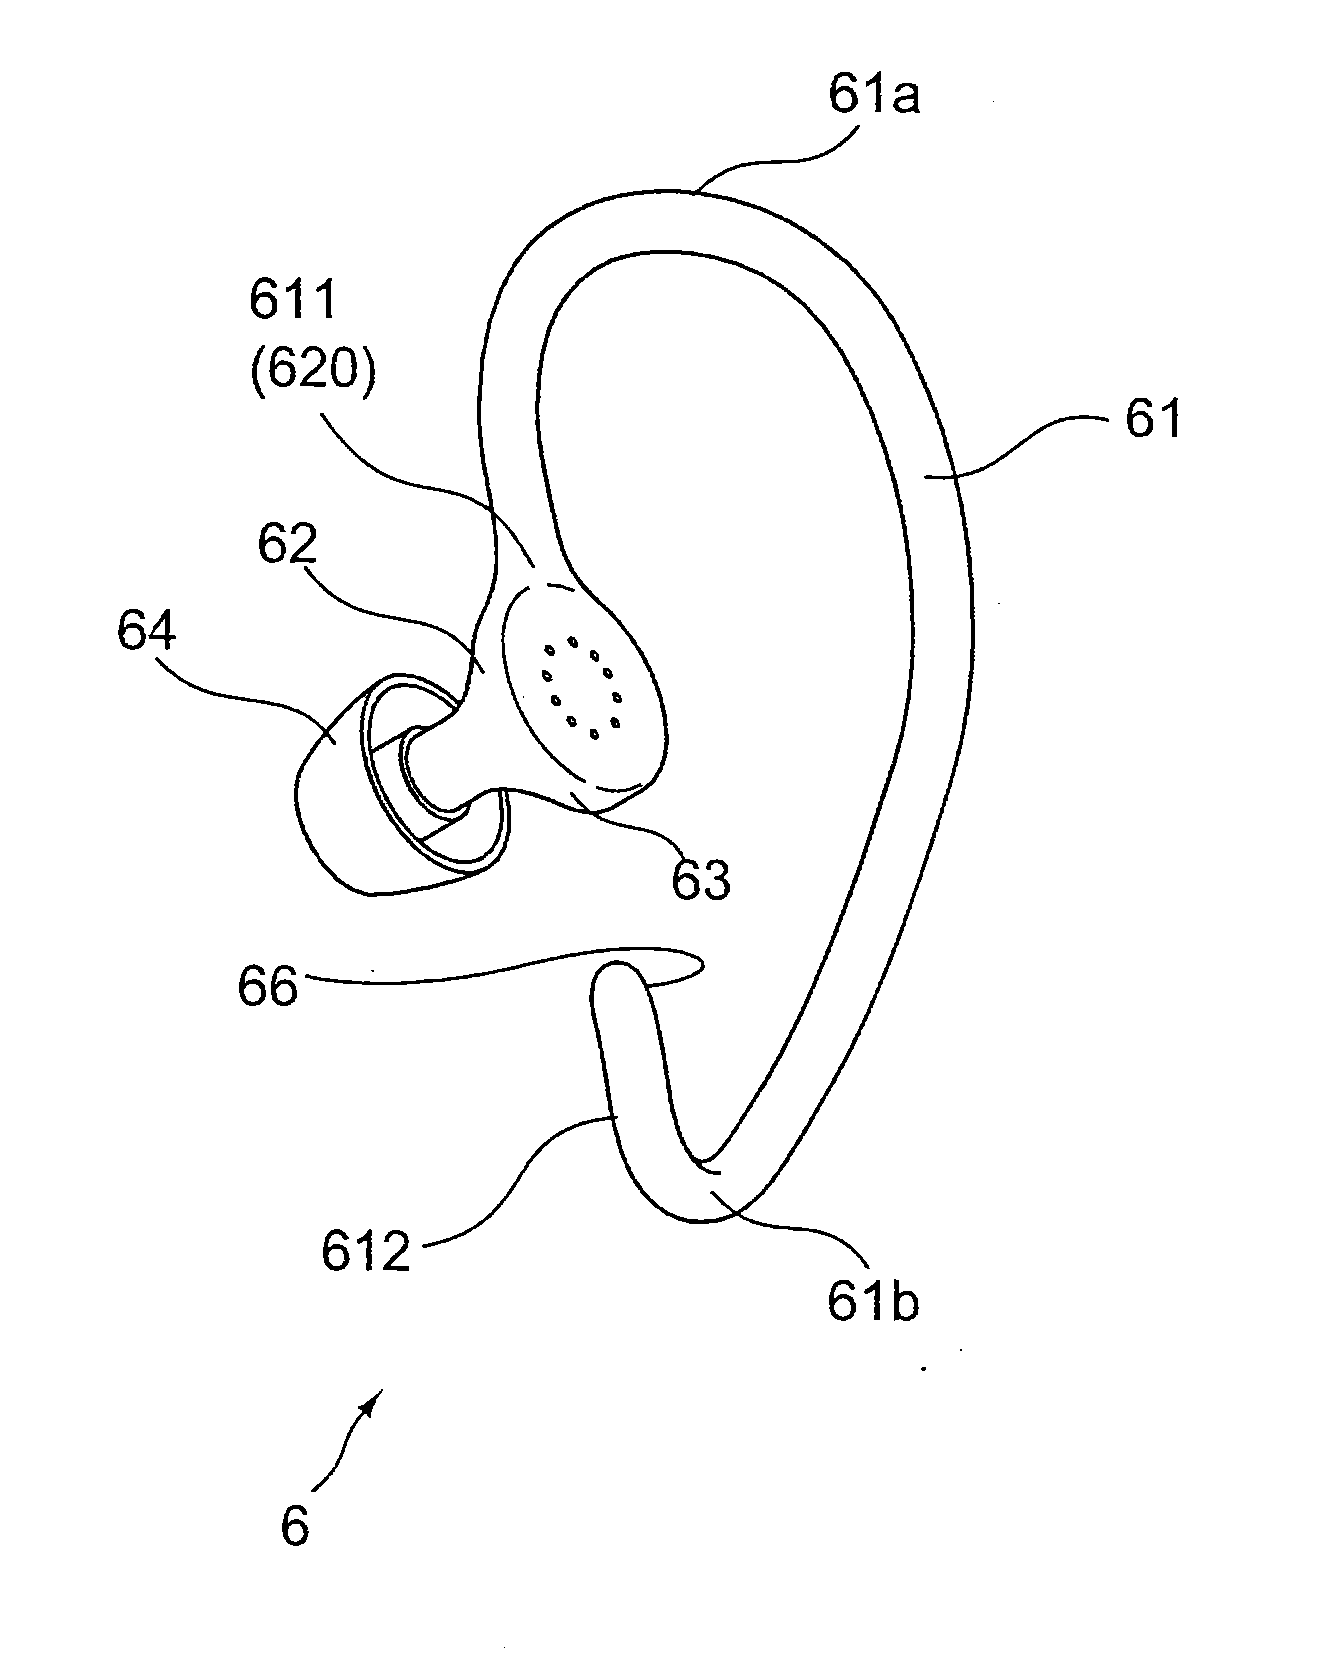 Auricle-installed apparatus